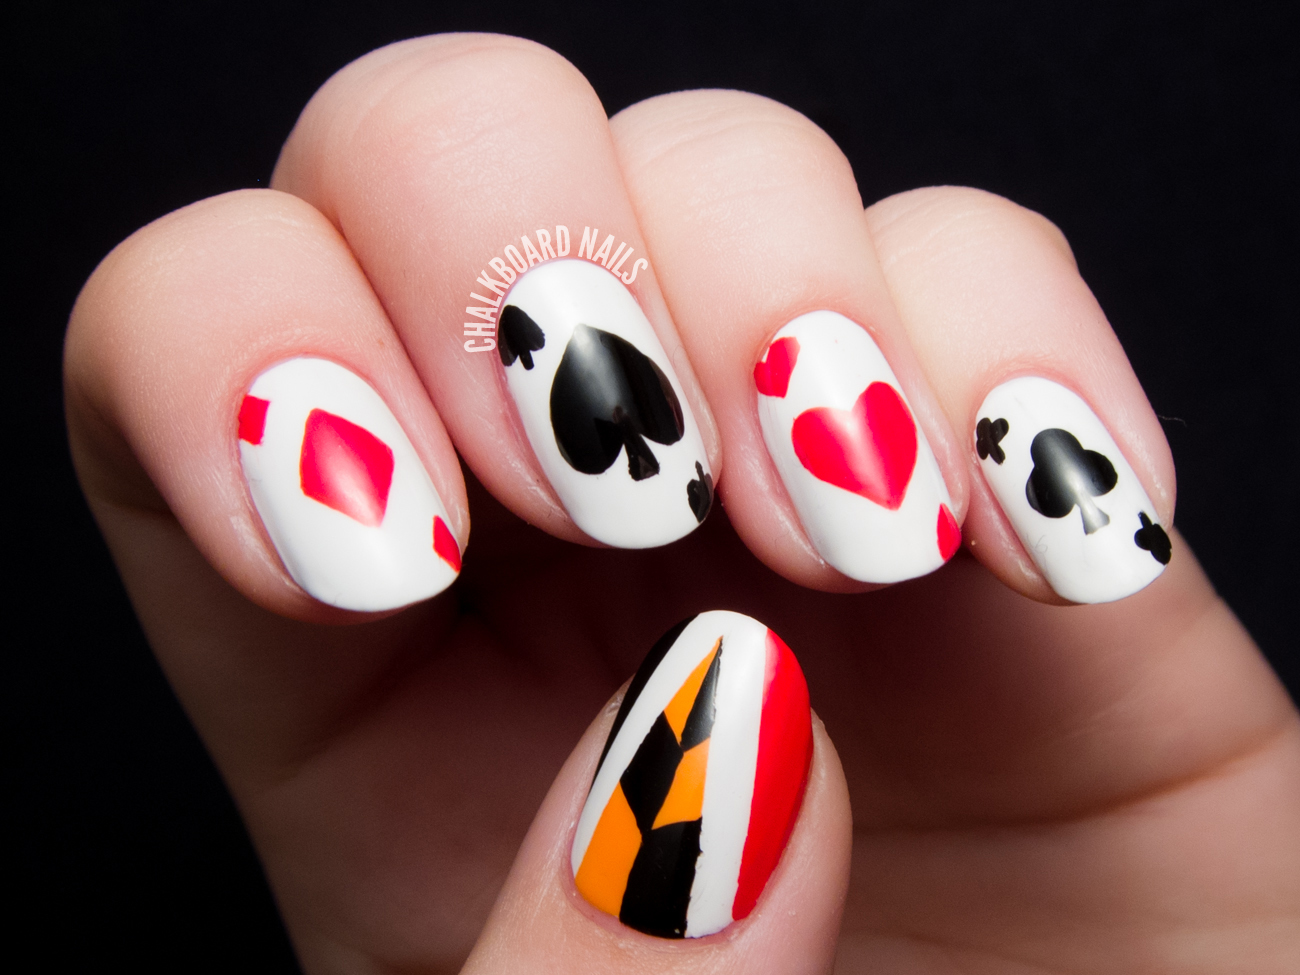 Queen of Hearts Nail Design with Playing Card Symbols - wide 7